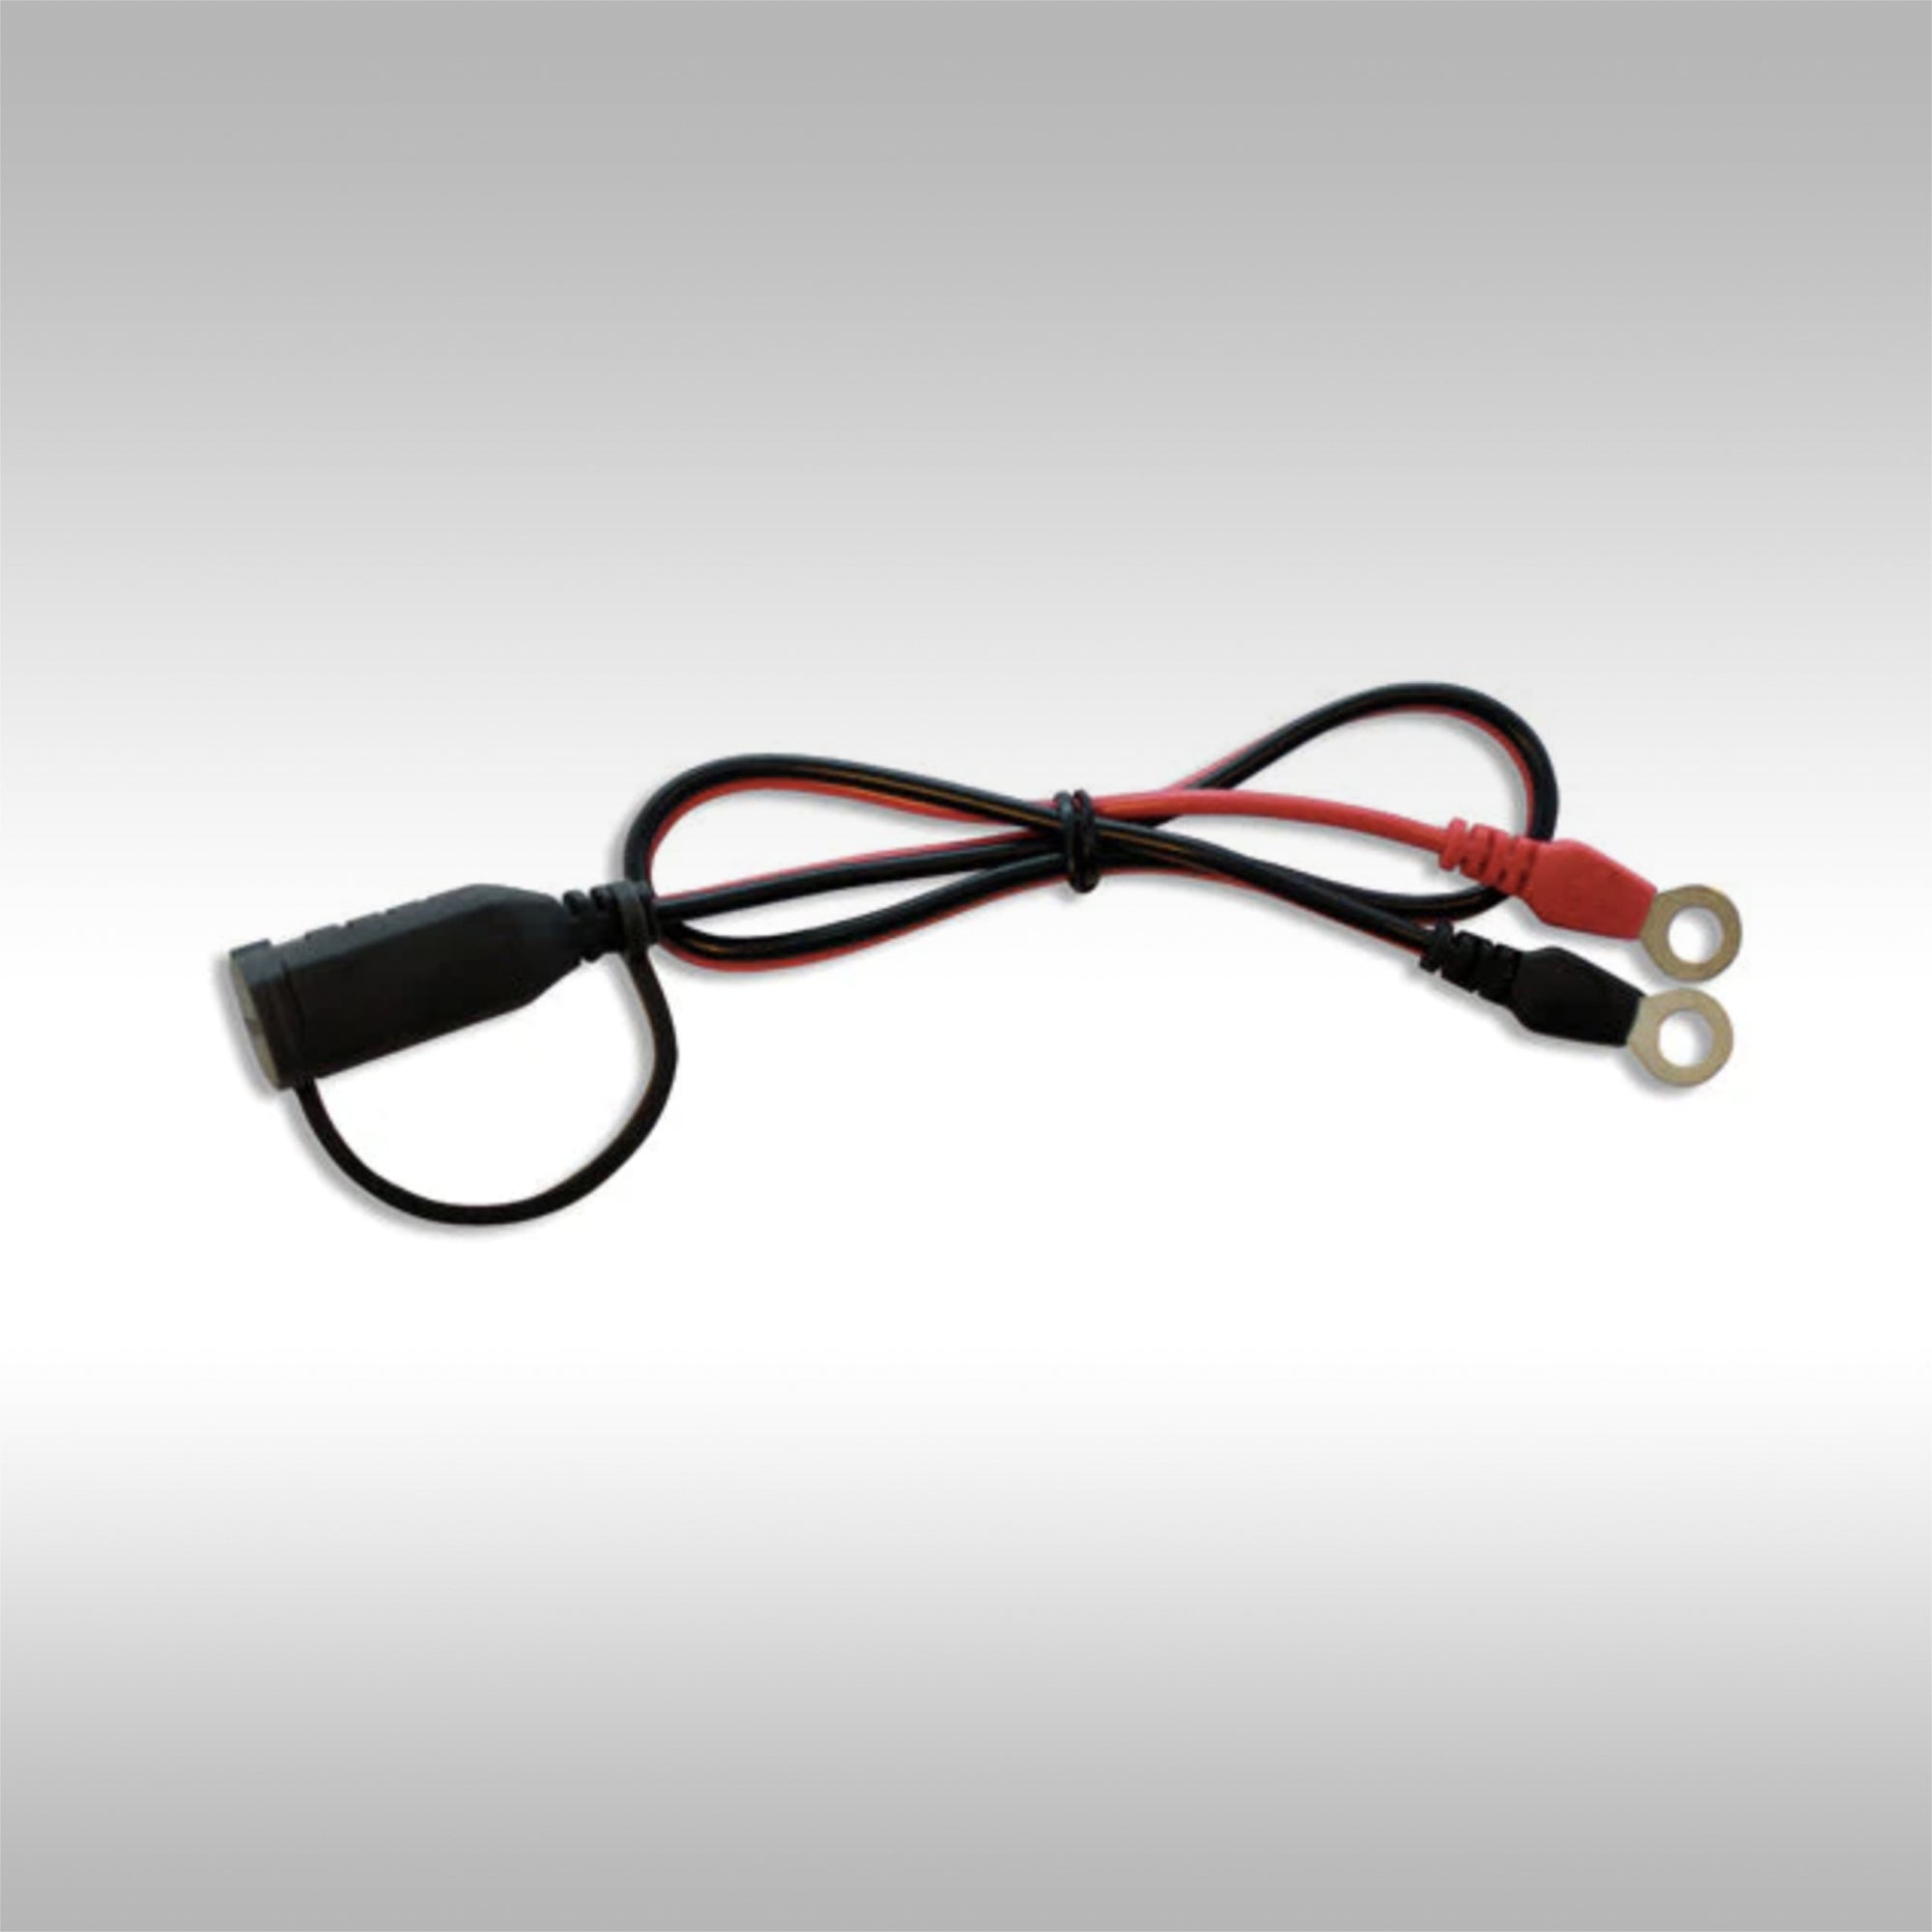 CTEK pigtail for connecting to your battery charger to the battery that is tucked away inside your motorcycle or other vehicle. Available in M6, M8 and M10 eyelet sizes.  